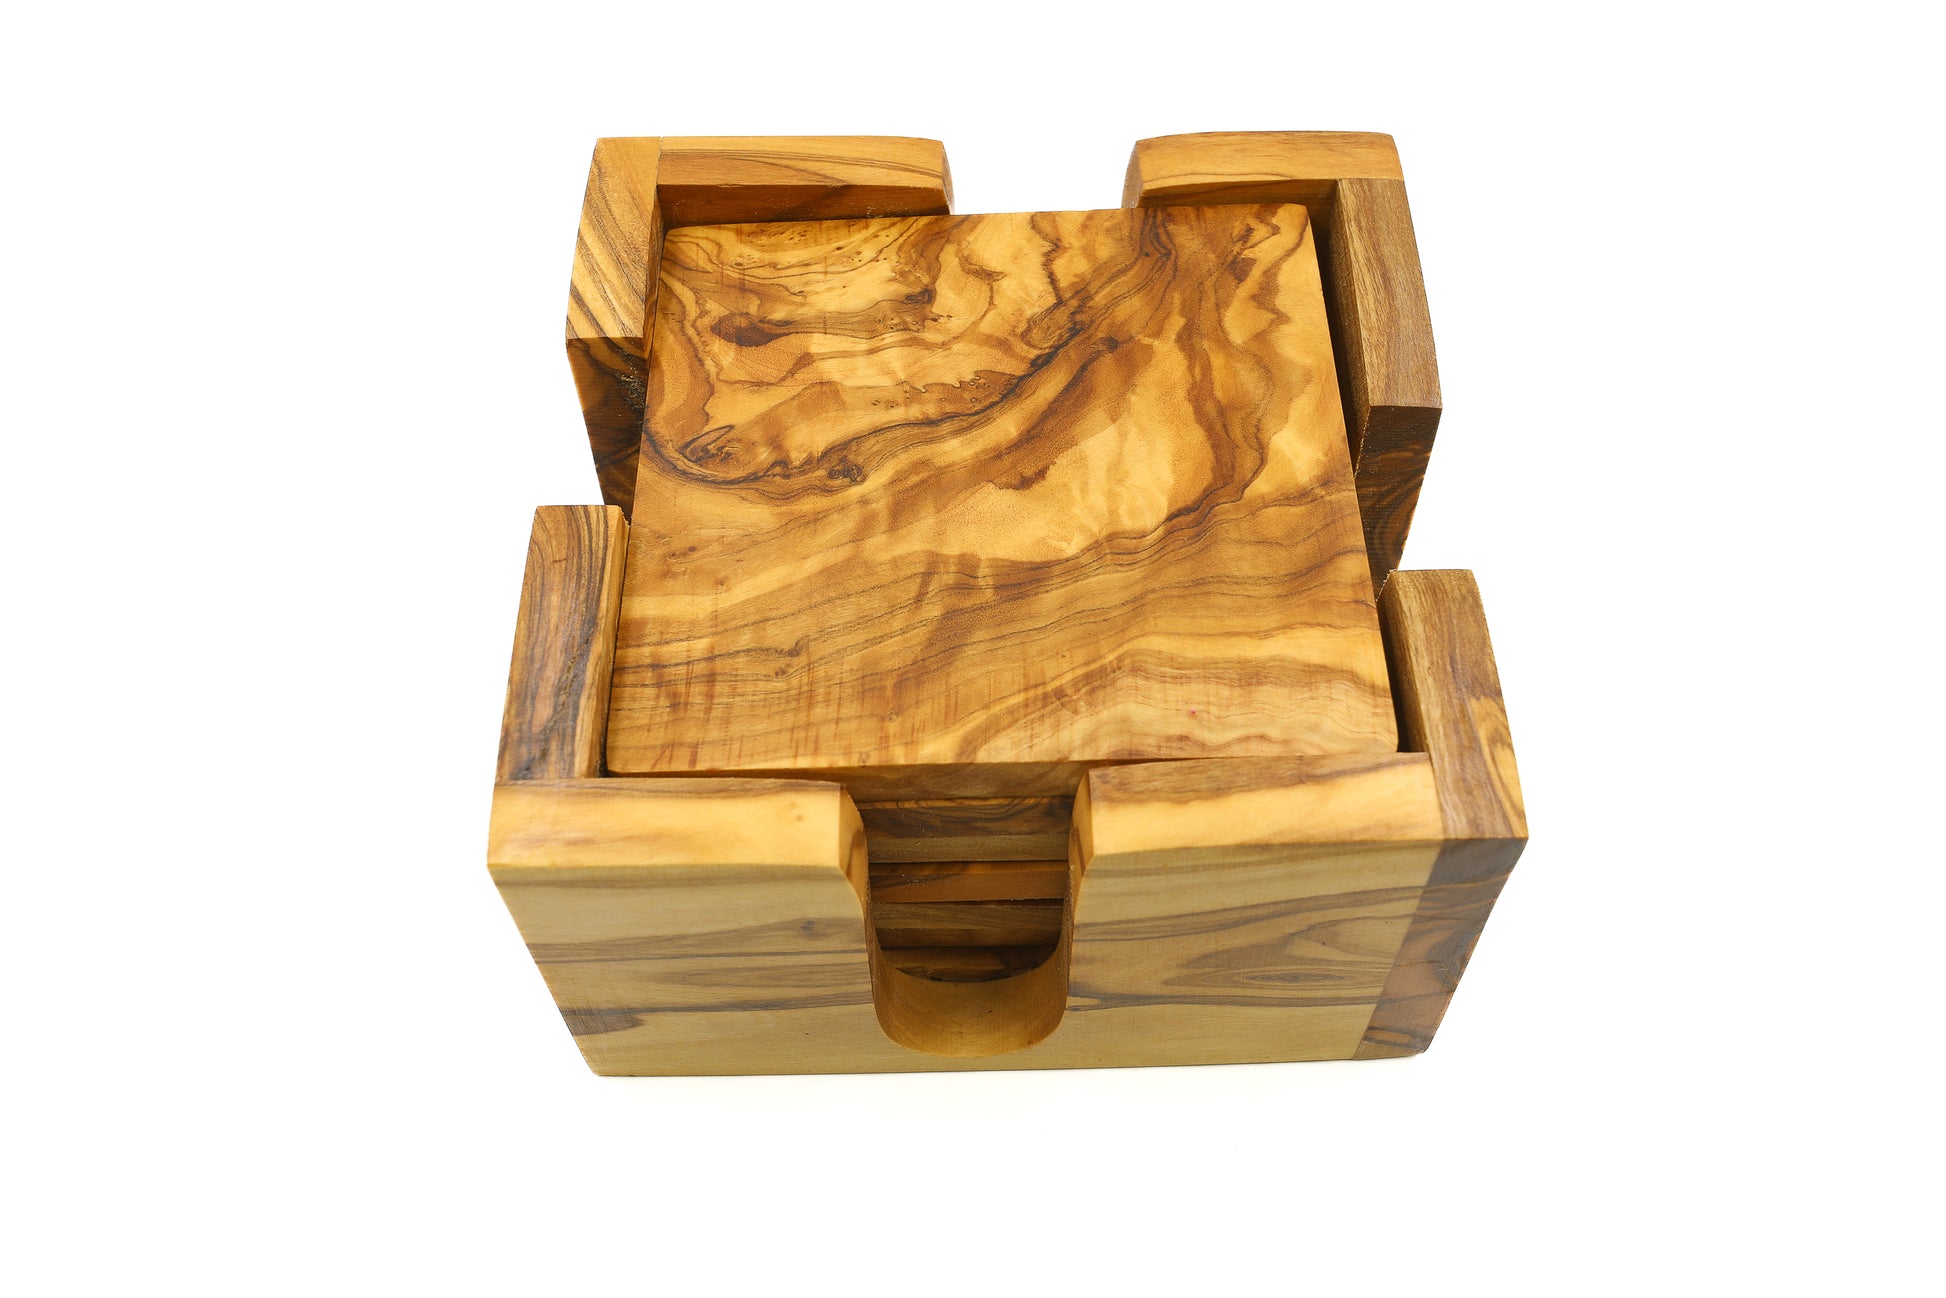 Olive wood coaster and trivet with a classic design